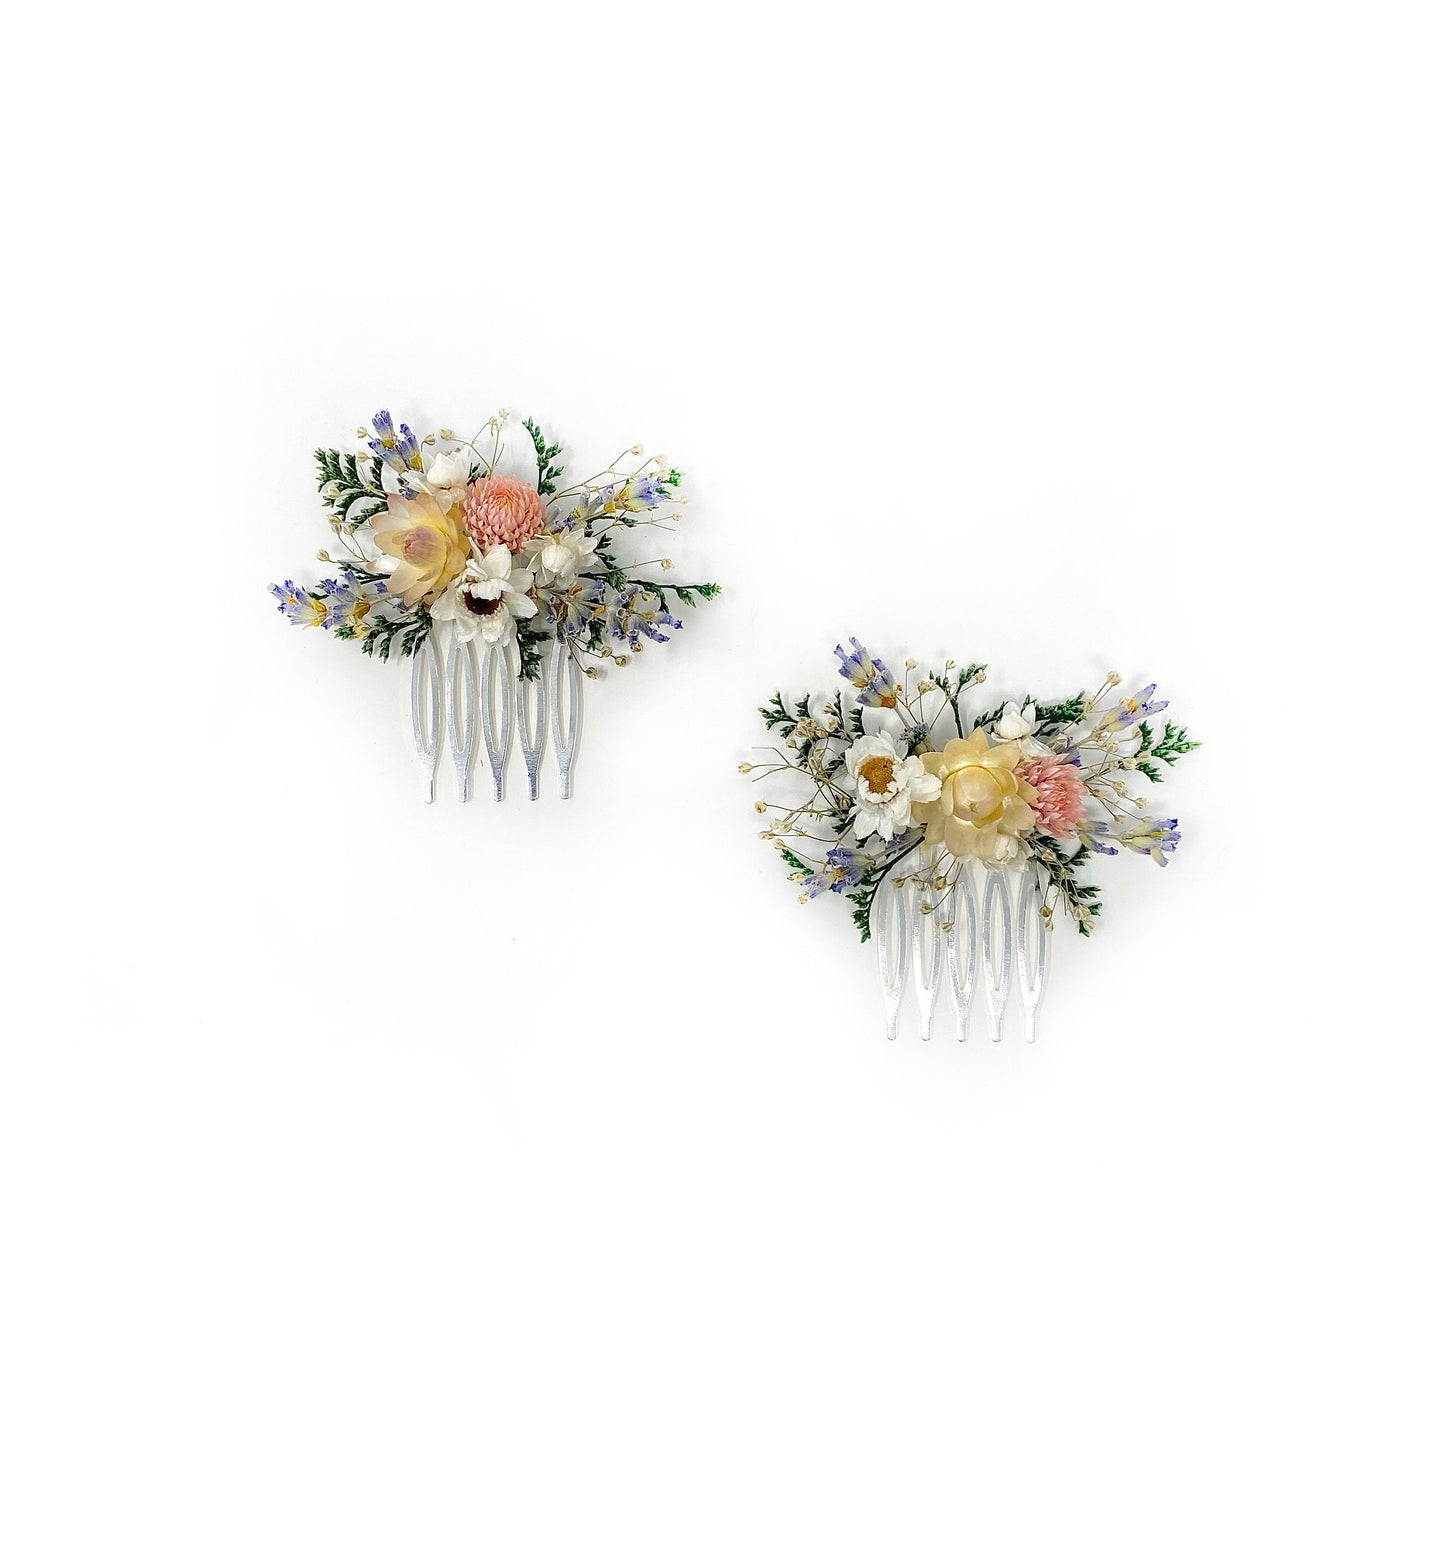 Hair Comb, Hair Pins, Dried flowers, Preserved, Floral Comb, Hair Clip Accessories, Wedding Accessory, Simple, Fairy, Spring, Prom, Bridal